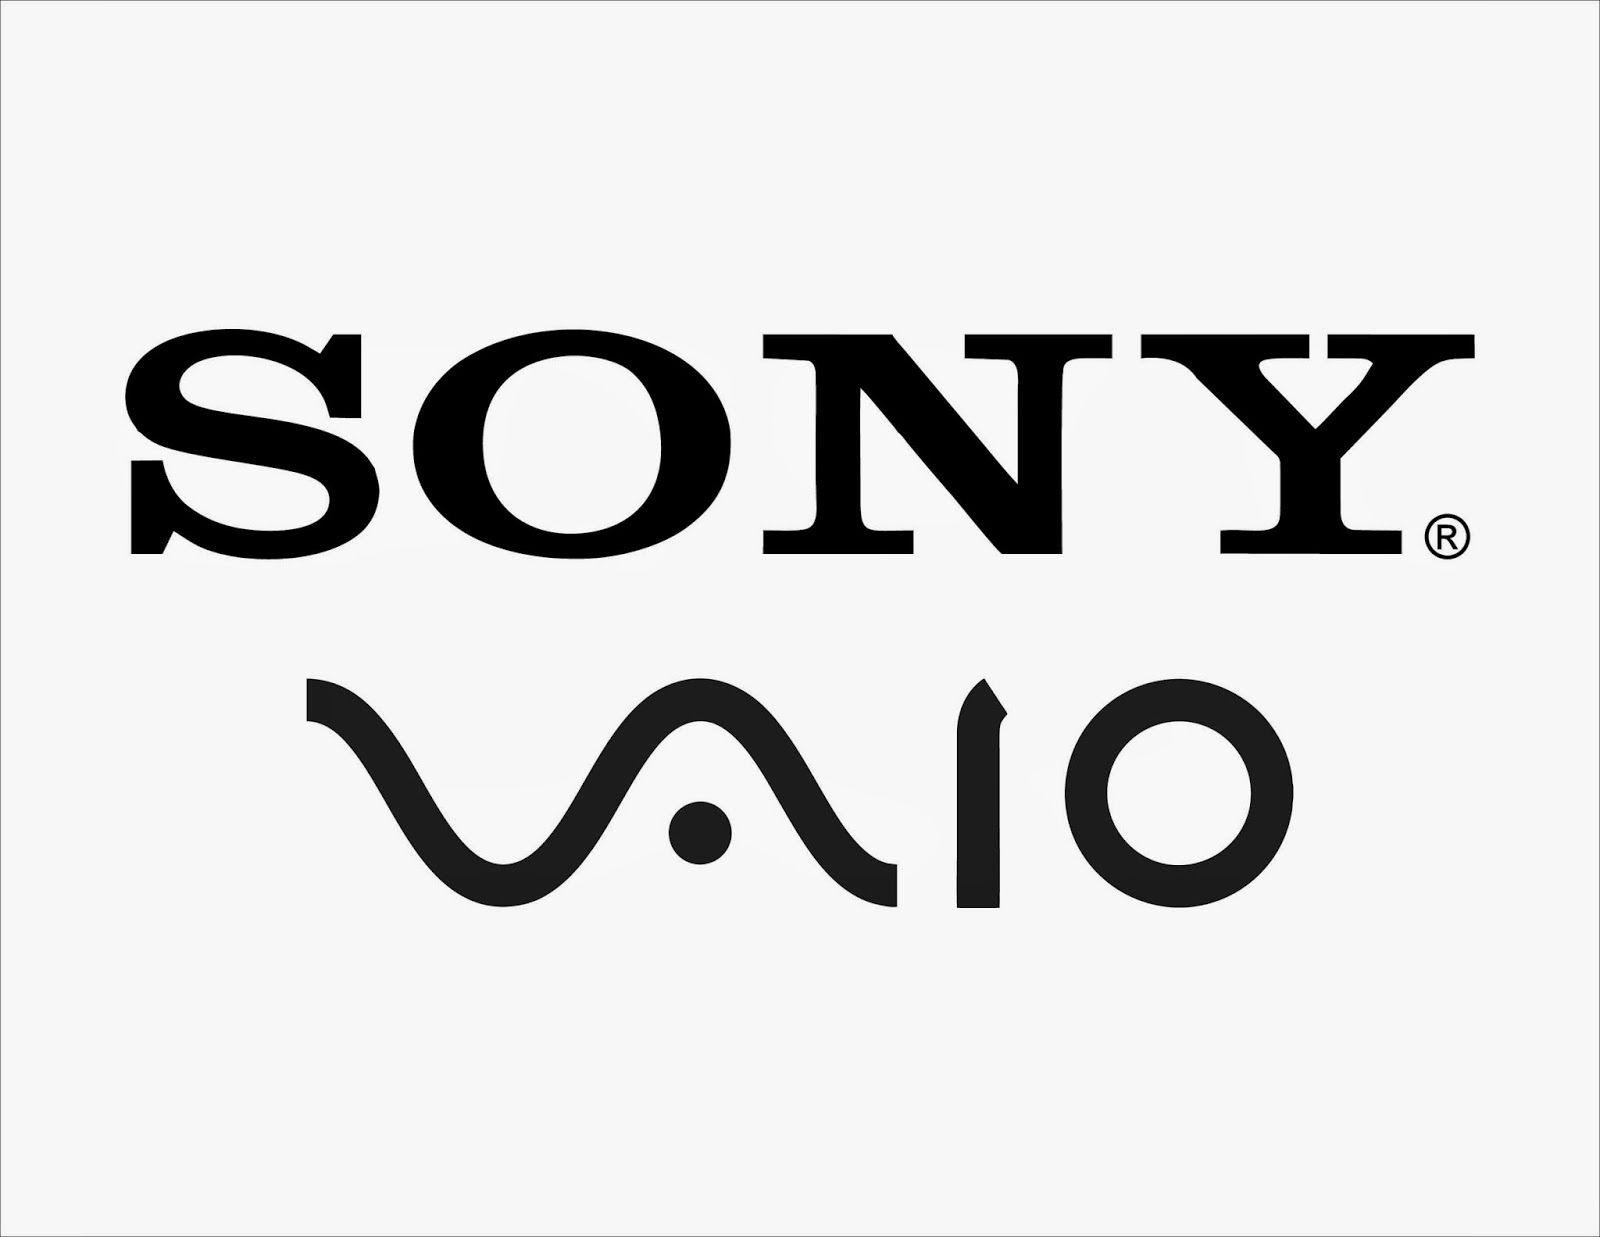 Vaio Logo - Another clever design that not many people would initially get